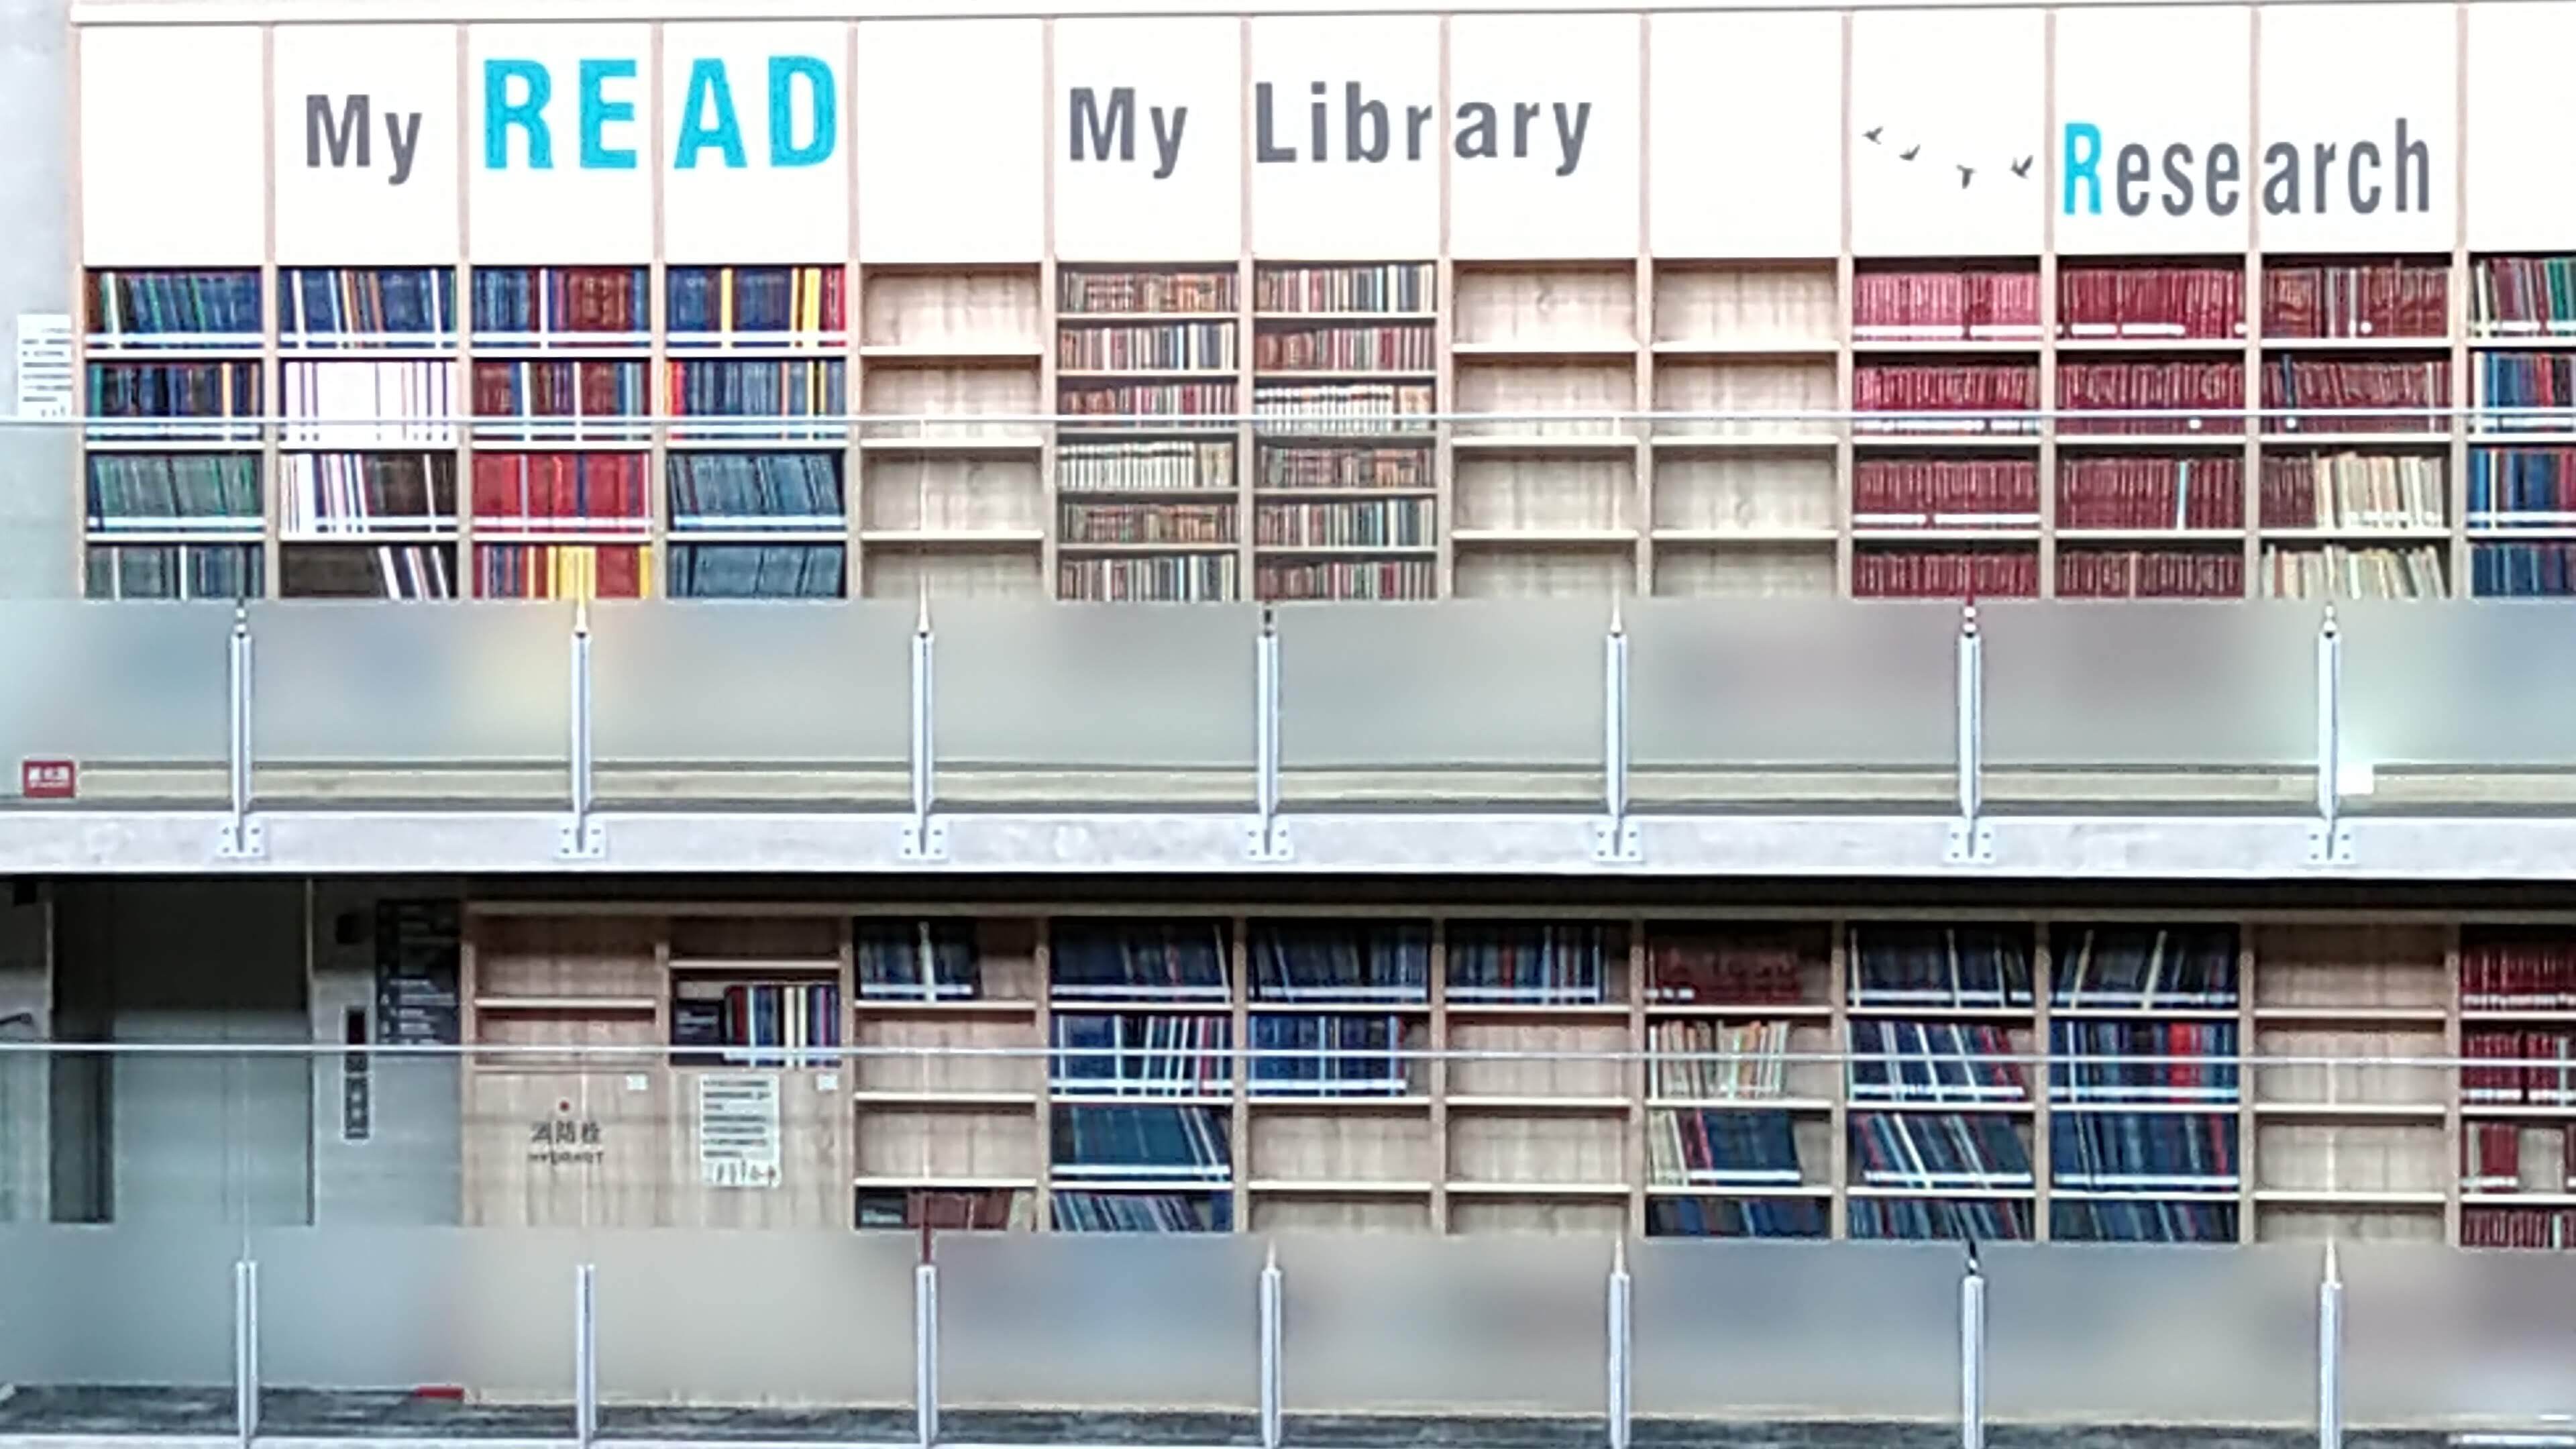 My READ My Library 牆